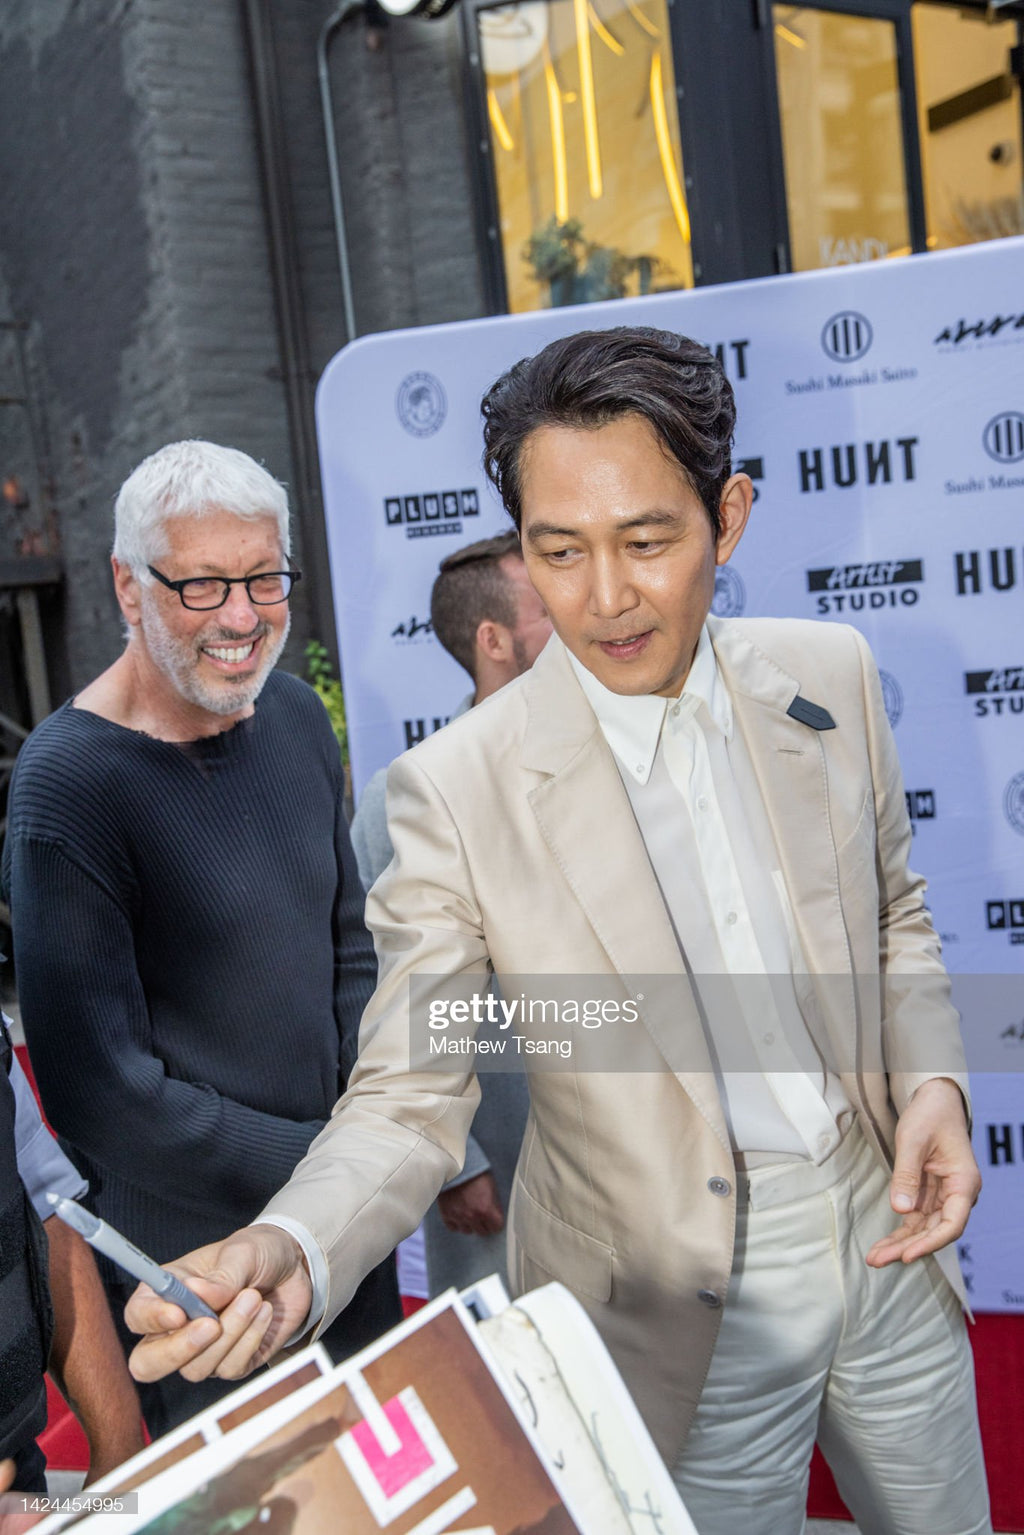 I played Squid Game (and won) at the 2022 Toronto Film Festival challenging LEE JUNG-JAE to an autograph duel!